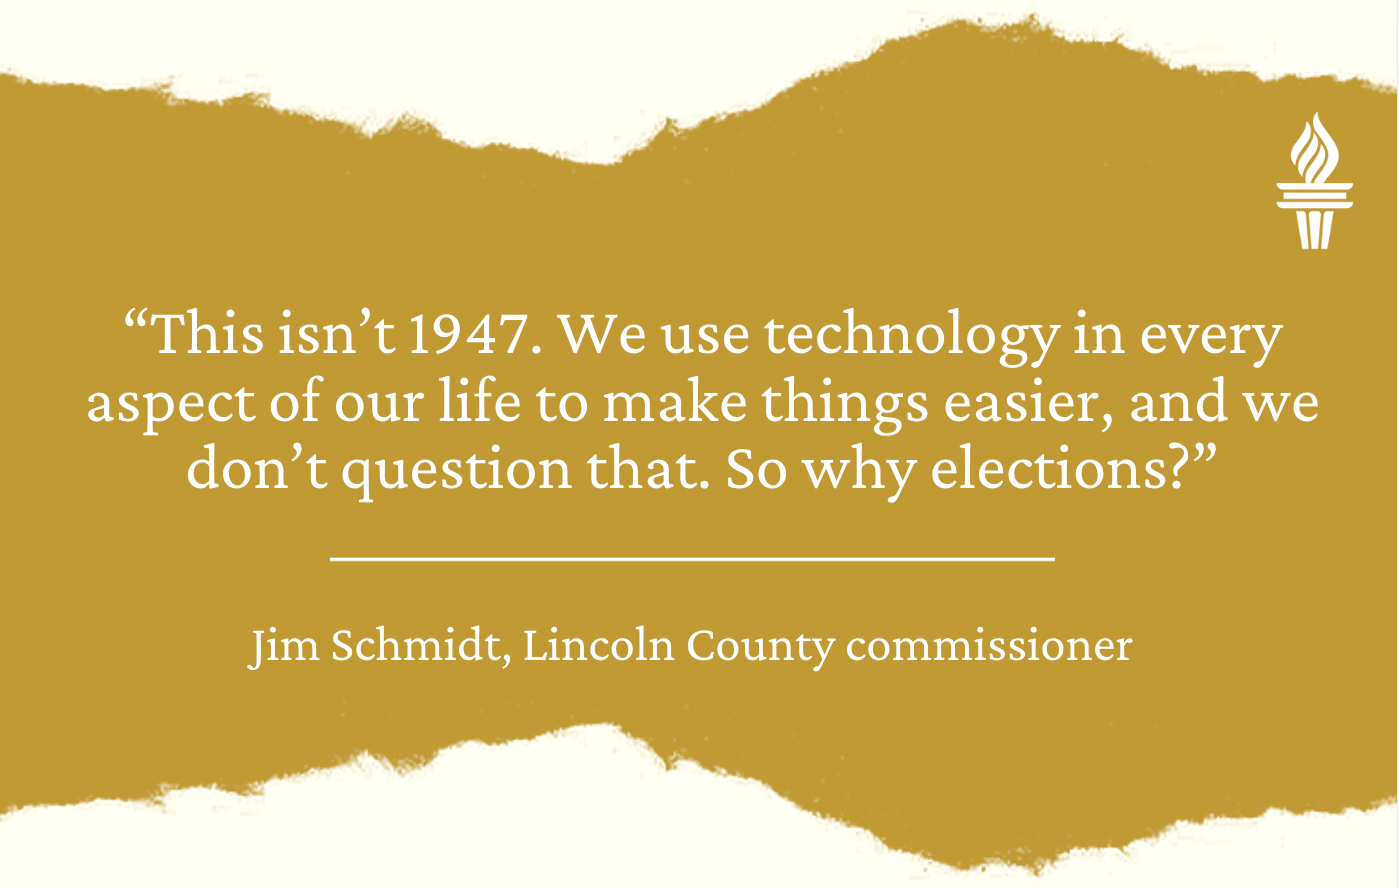 Quote from Jim Schmidt, Lincoln County commissioner: "This isn't 1947. We use technology in every aspect of our life to make things easier, and we don't question that. So why elections."